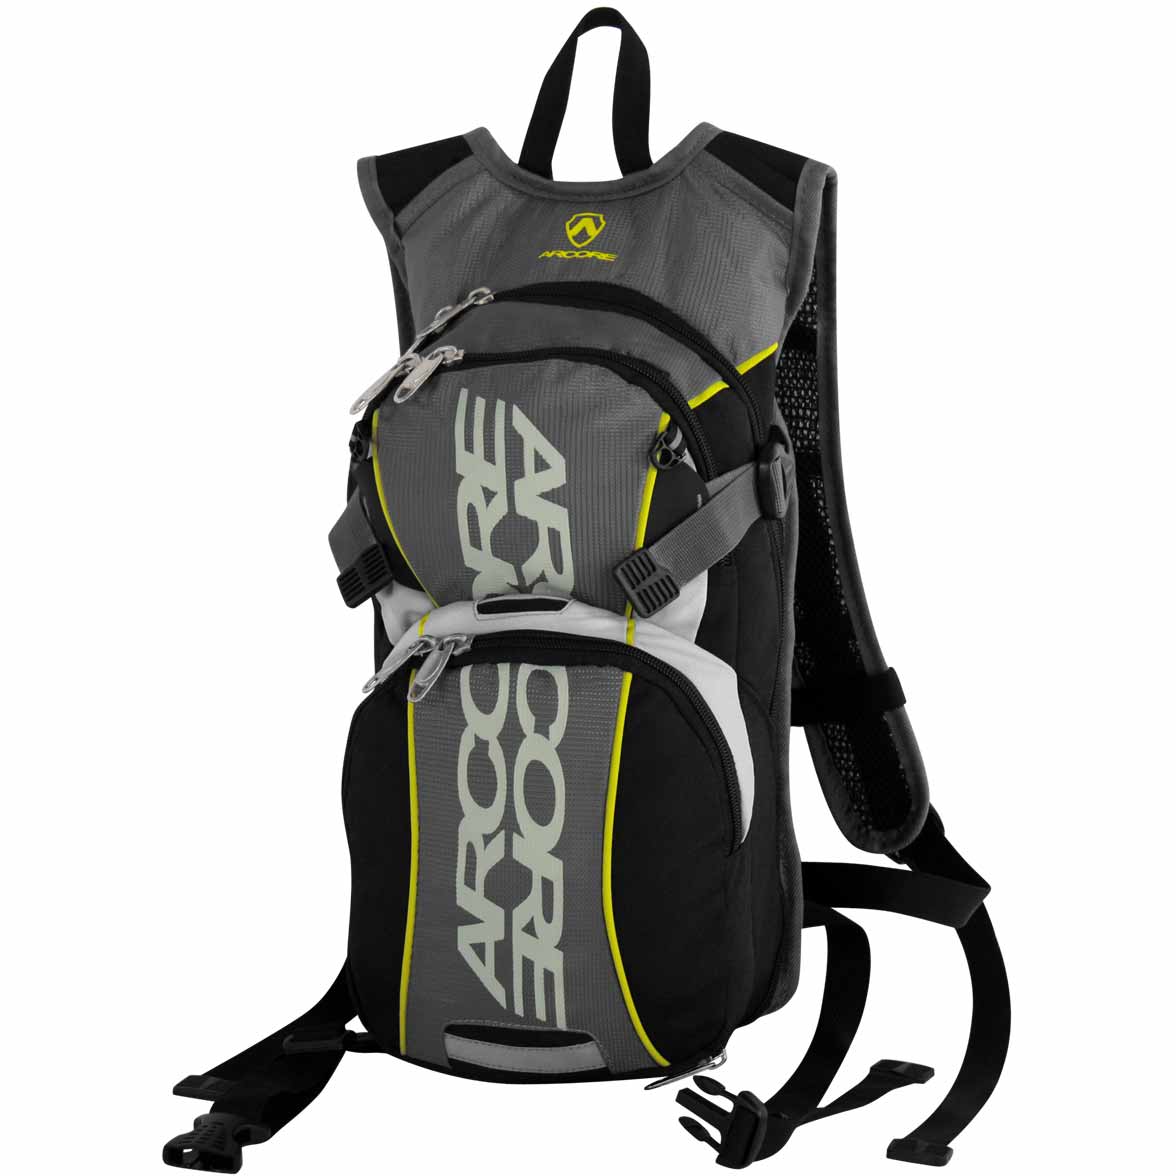 SD08-20A - Cycling backpack